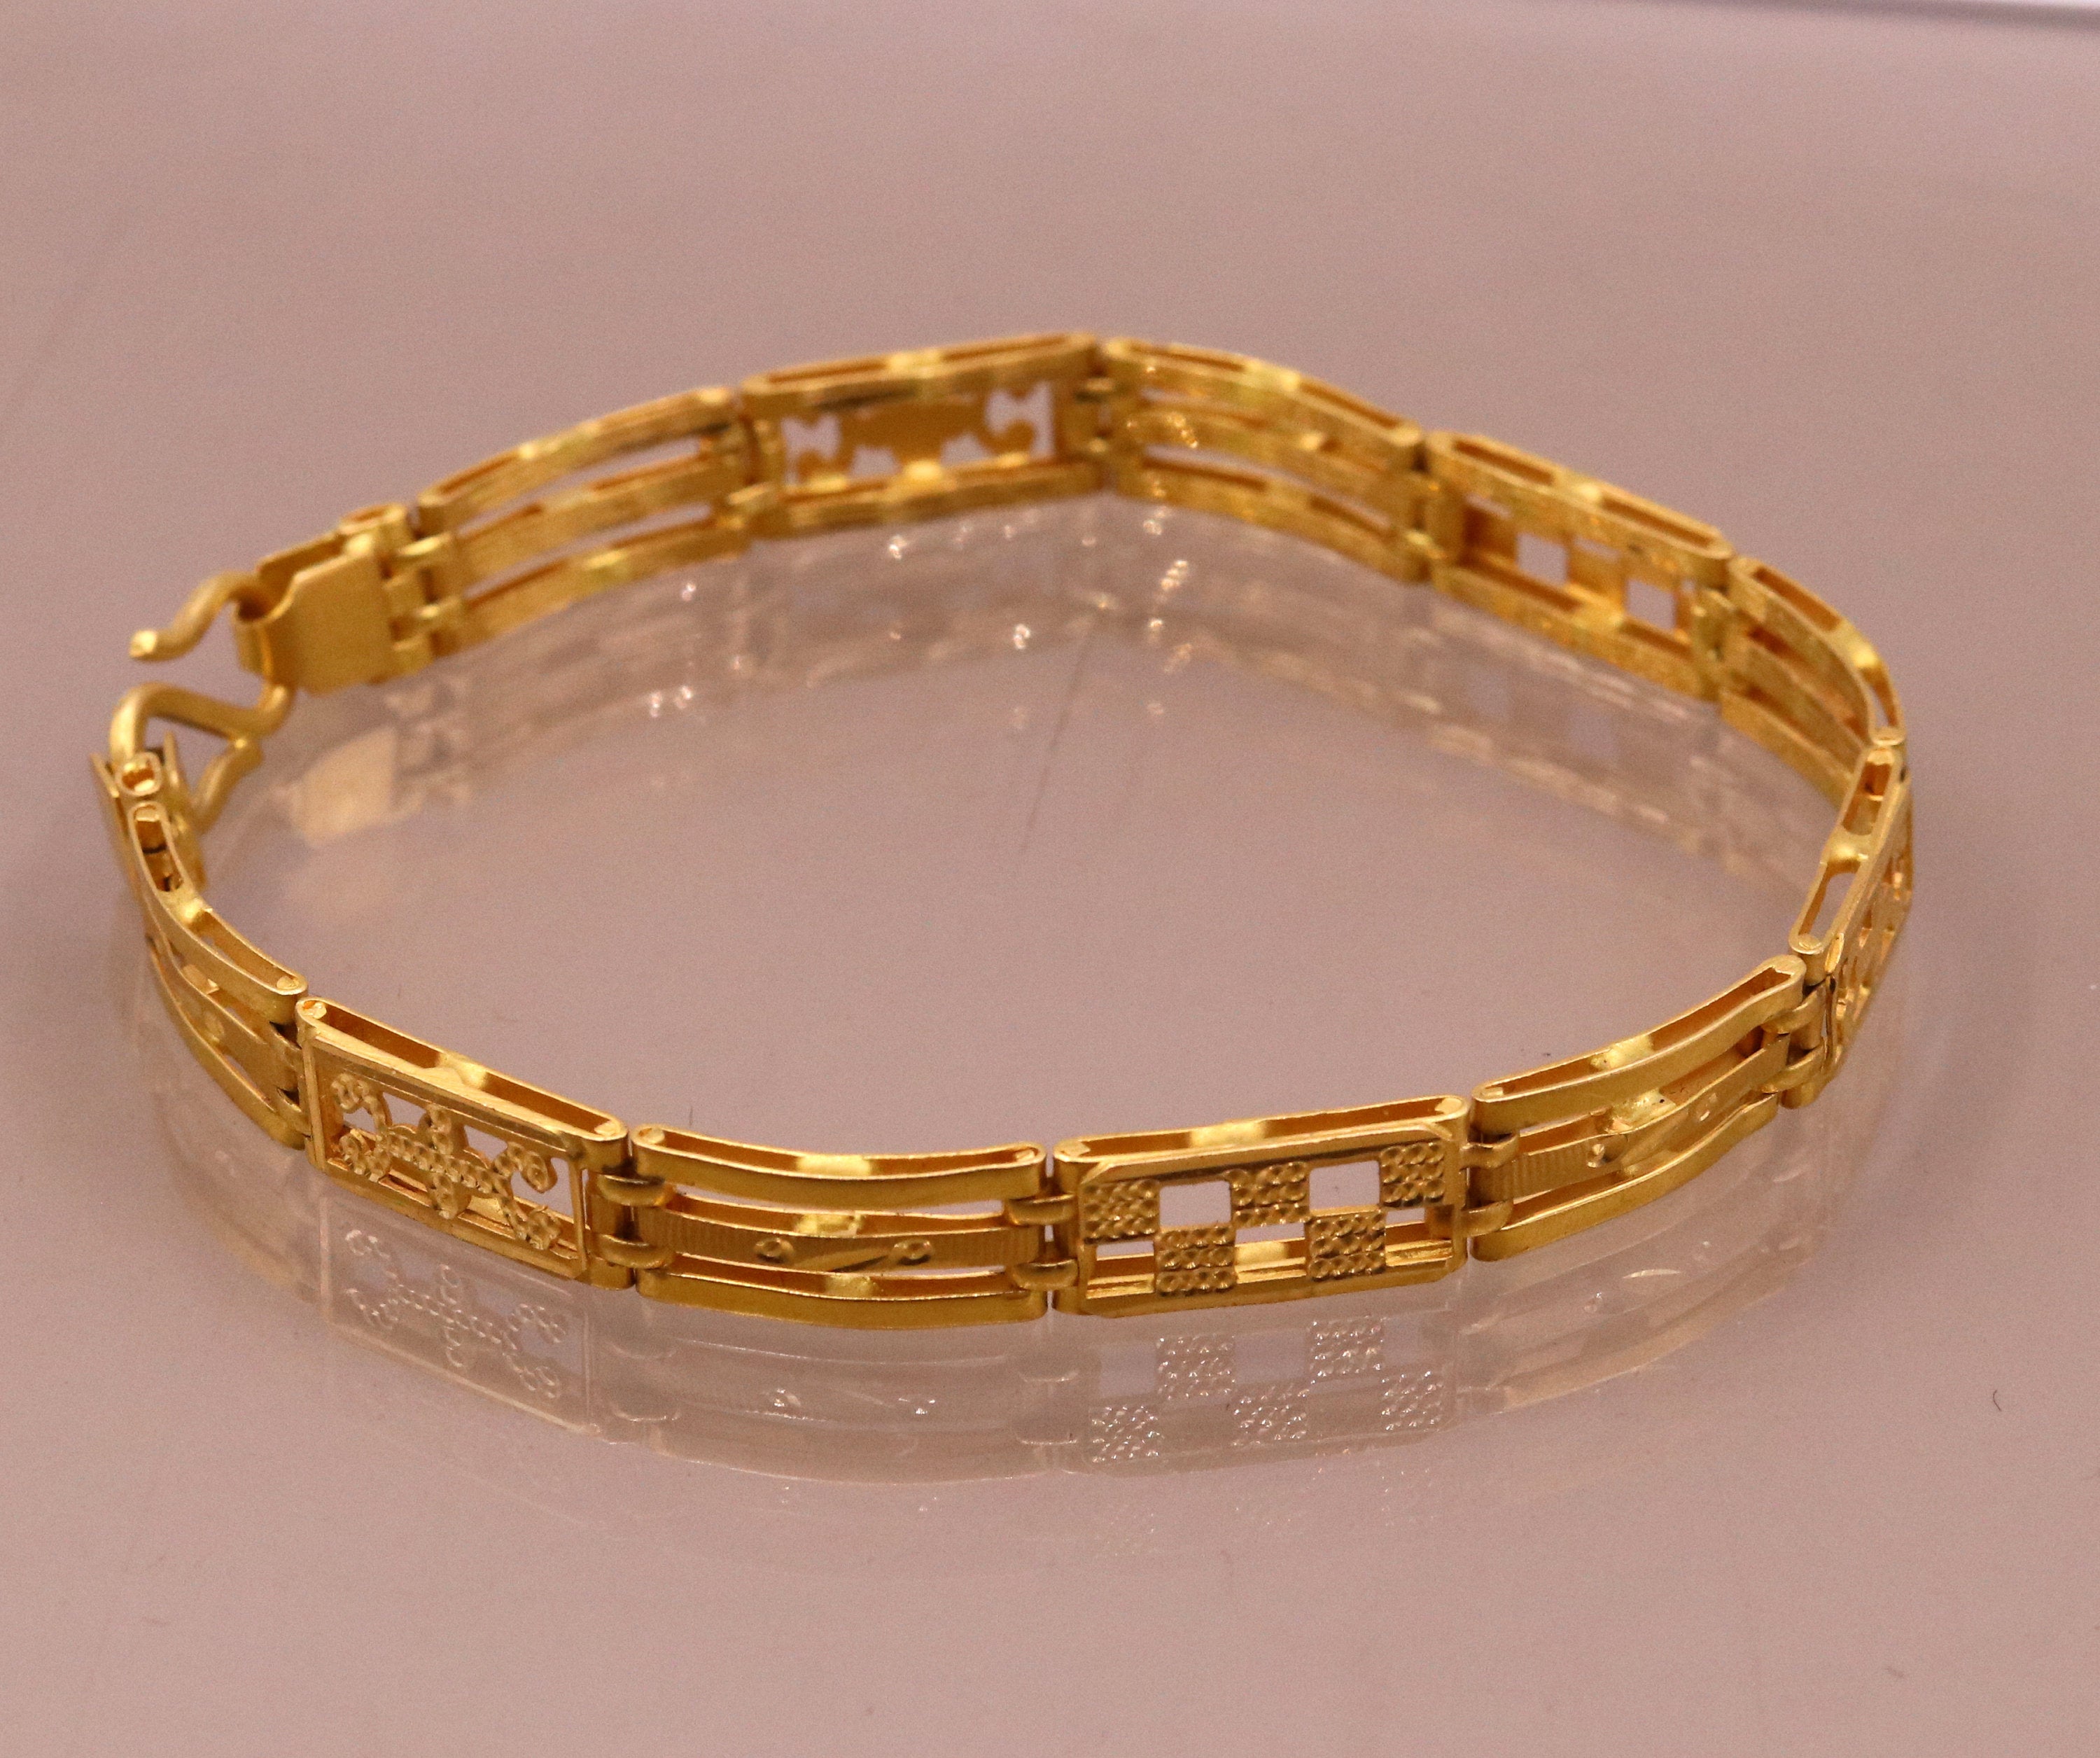 Authentic 22kt yellow gold handmade stylish solid flexible bracelet unisex  top class gifting from Rajasthan india  TRIBAL ORNAMENTS